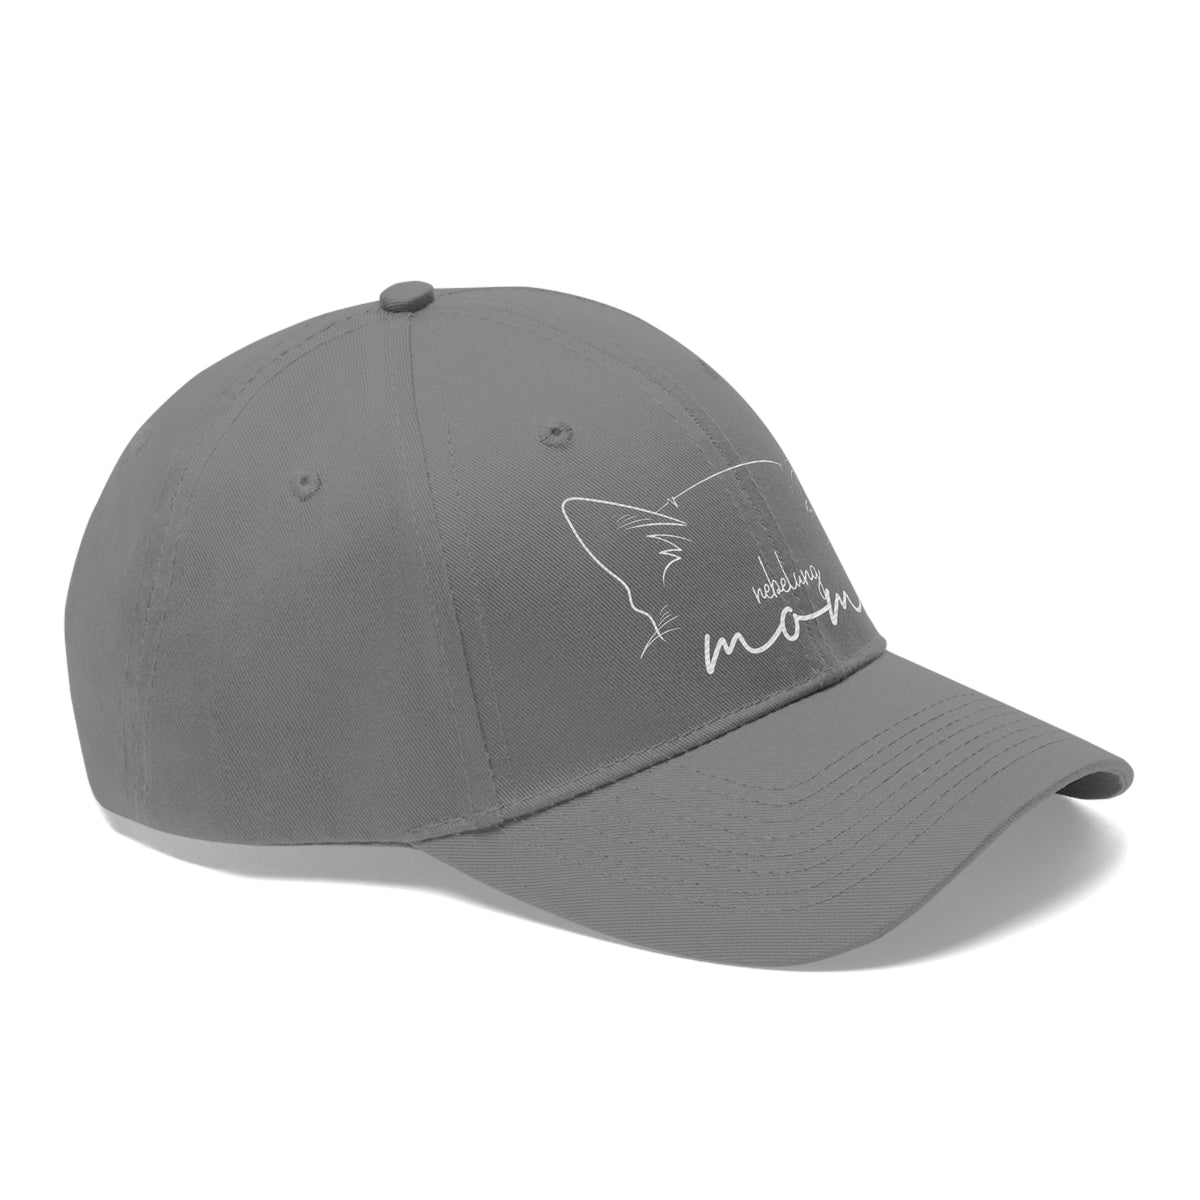 Nebelung Cat Mom Embroidered Twill Hat